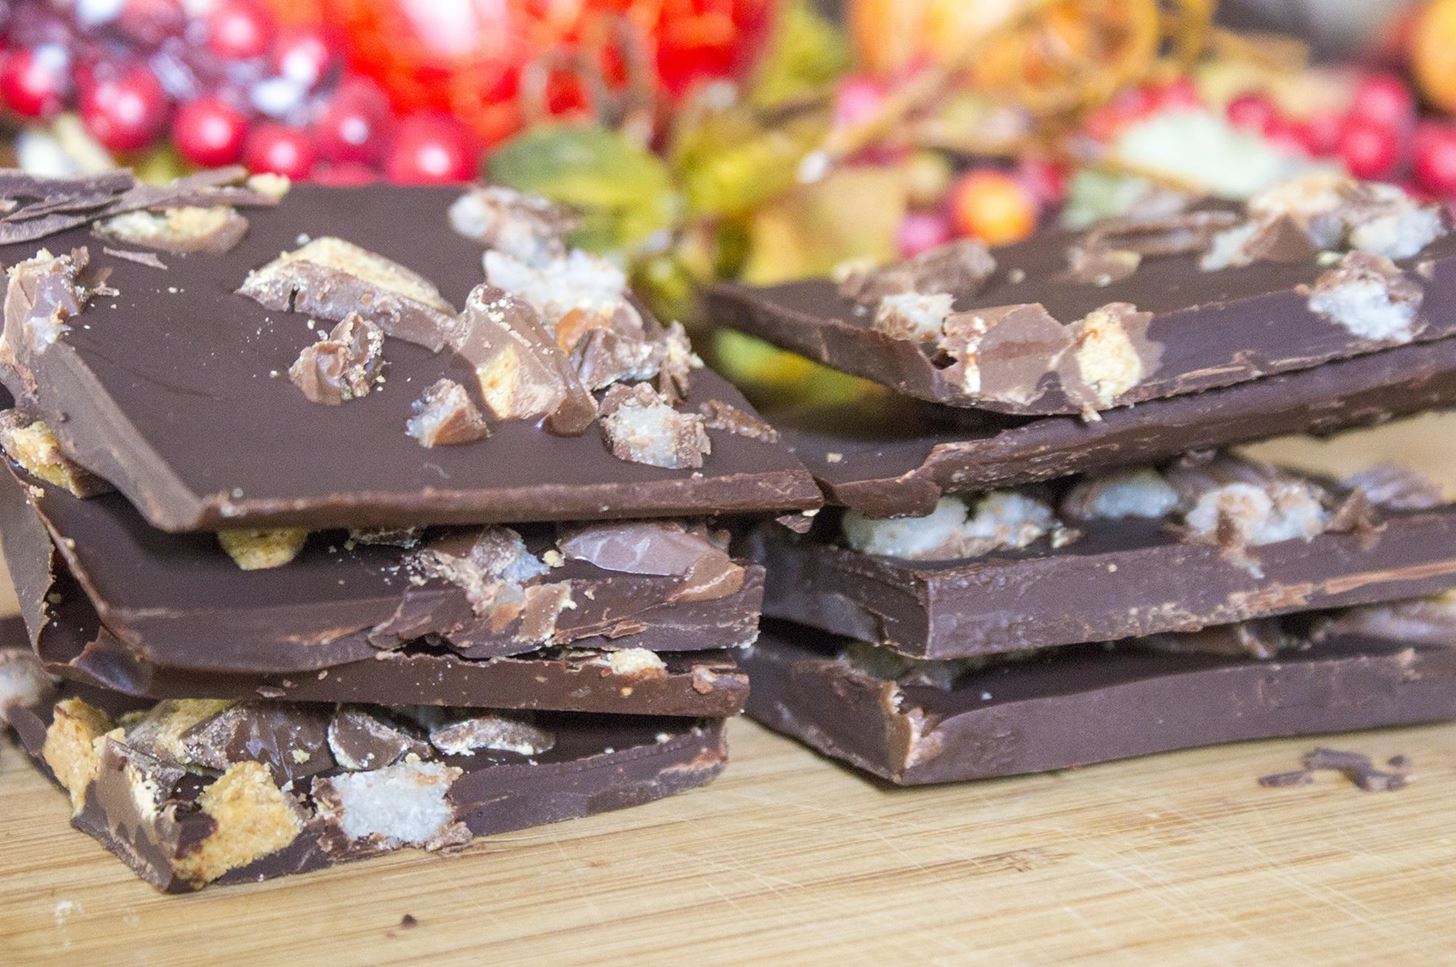 5 Delectable Ways to Use Up Your Leftover Halloween Chocolate